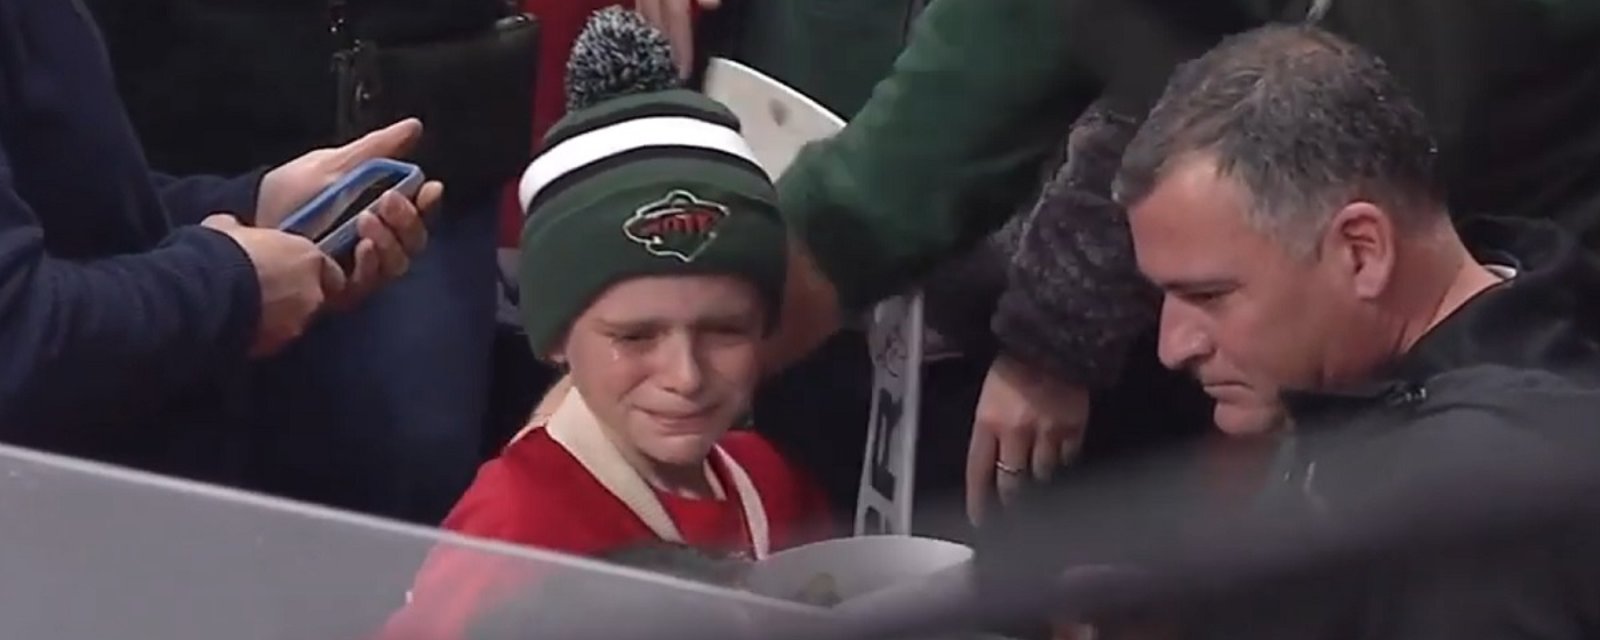 Devan Dubnyk brings a young fan and his father to tears.